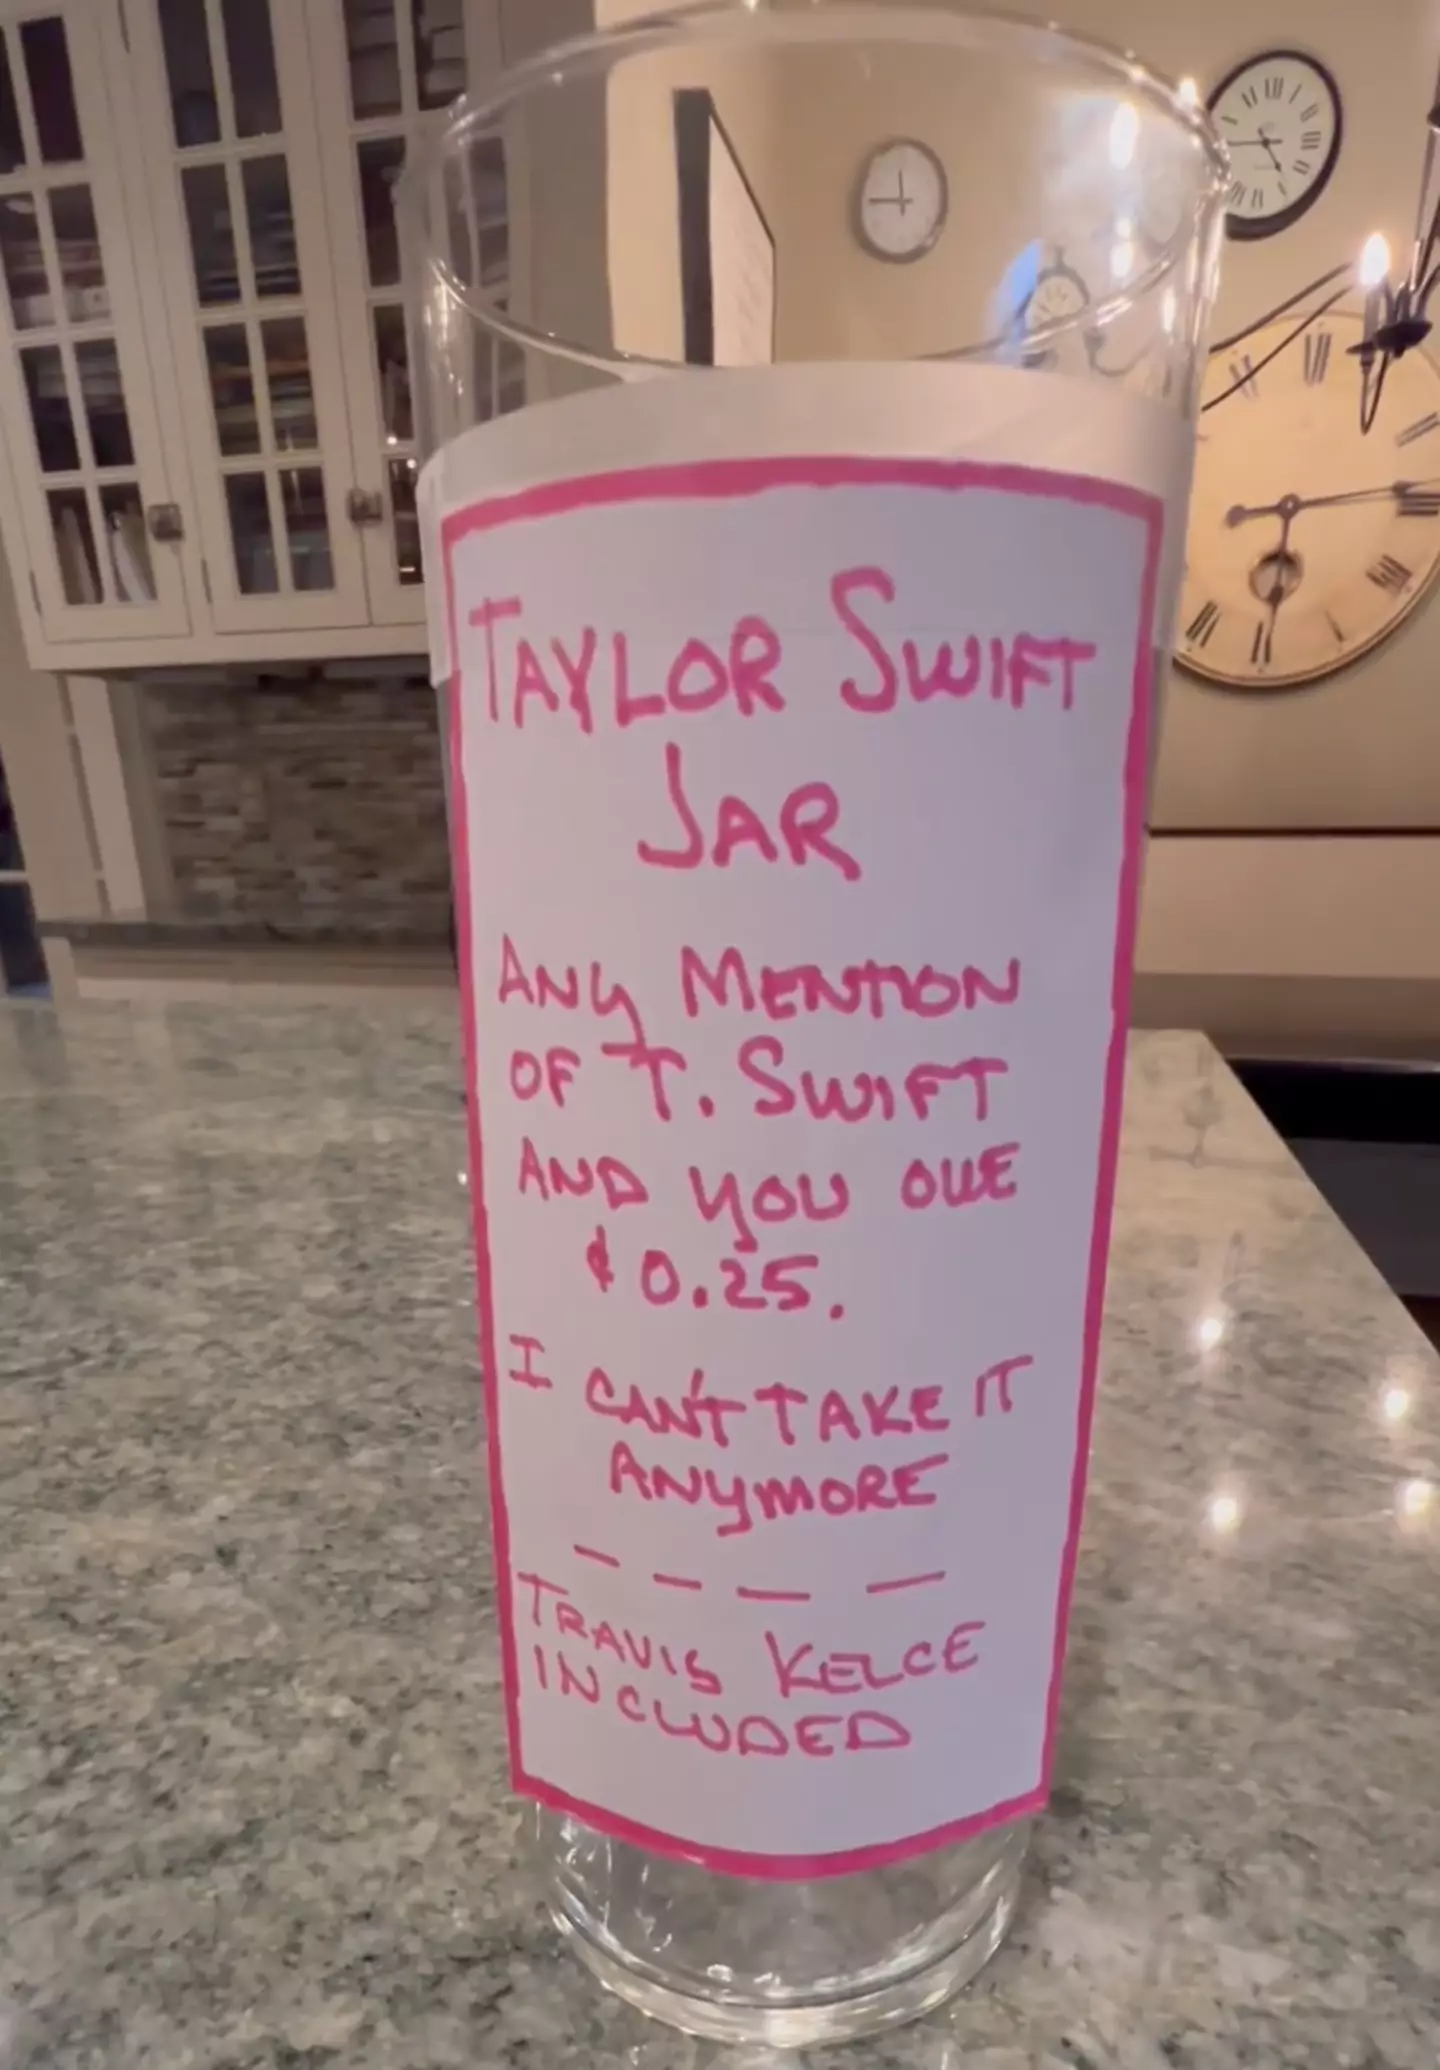 The jar required a payment of a quarter every time the singer or her boyfriend was mentioned.